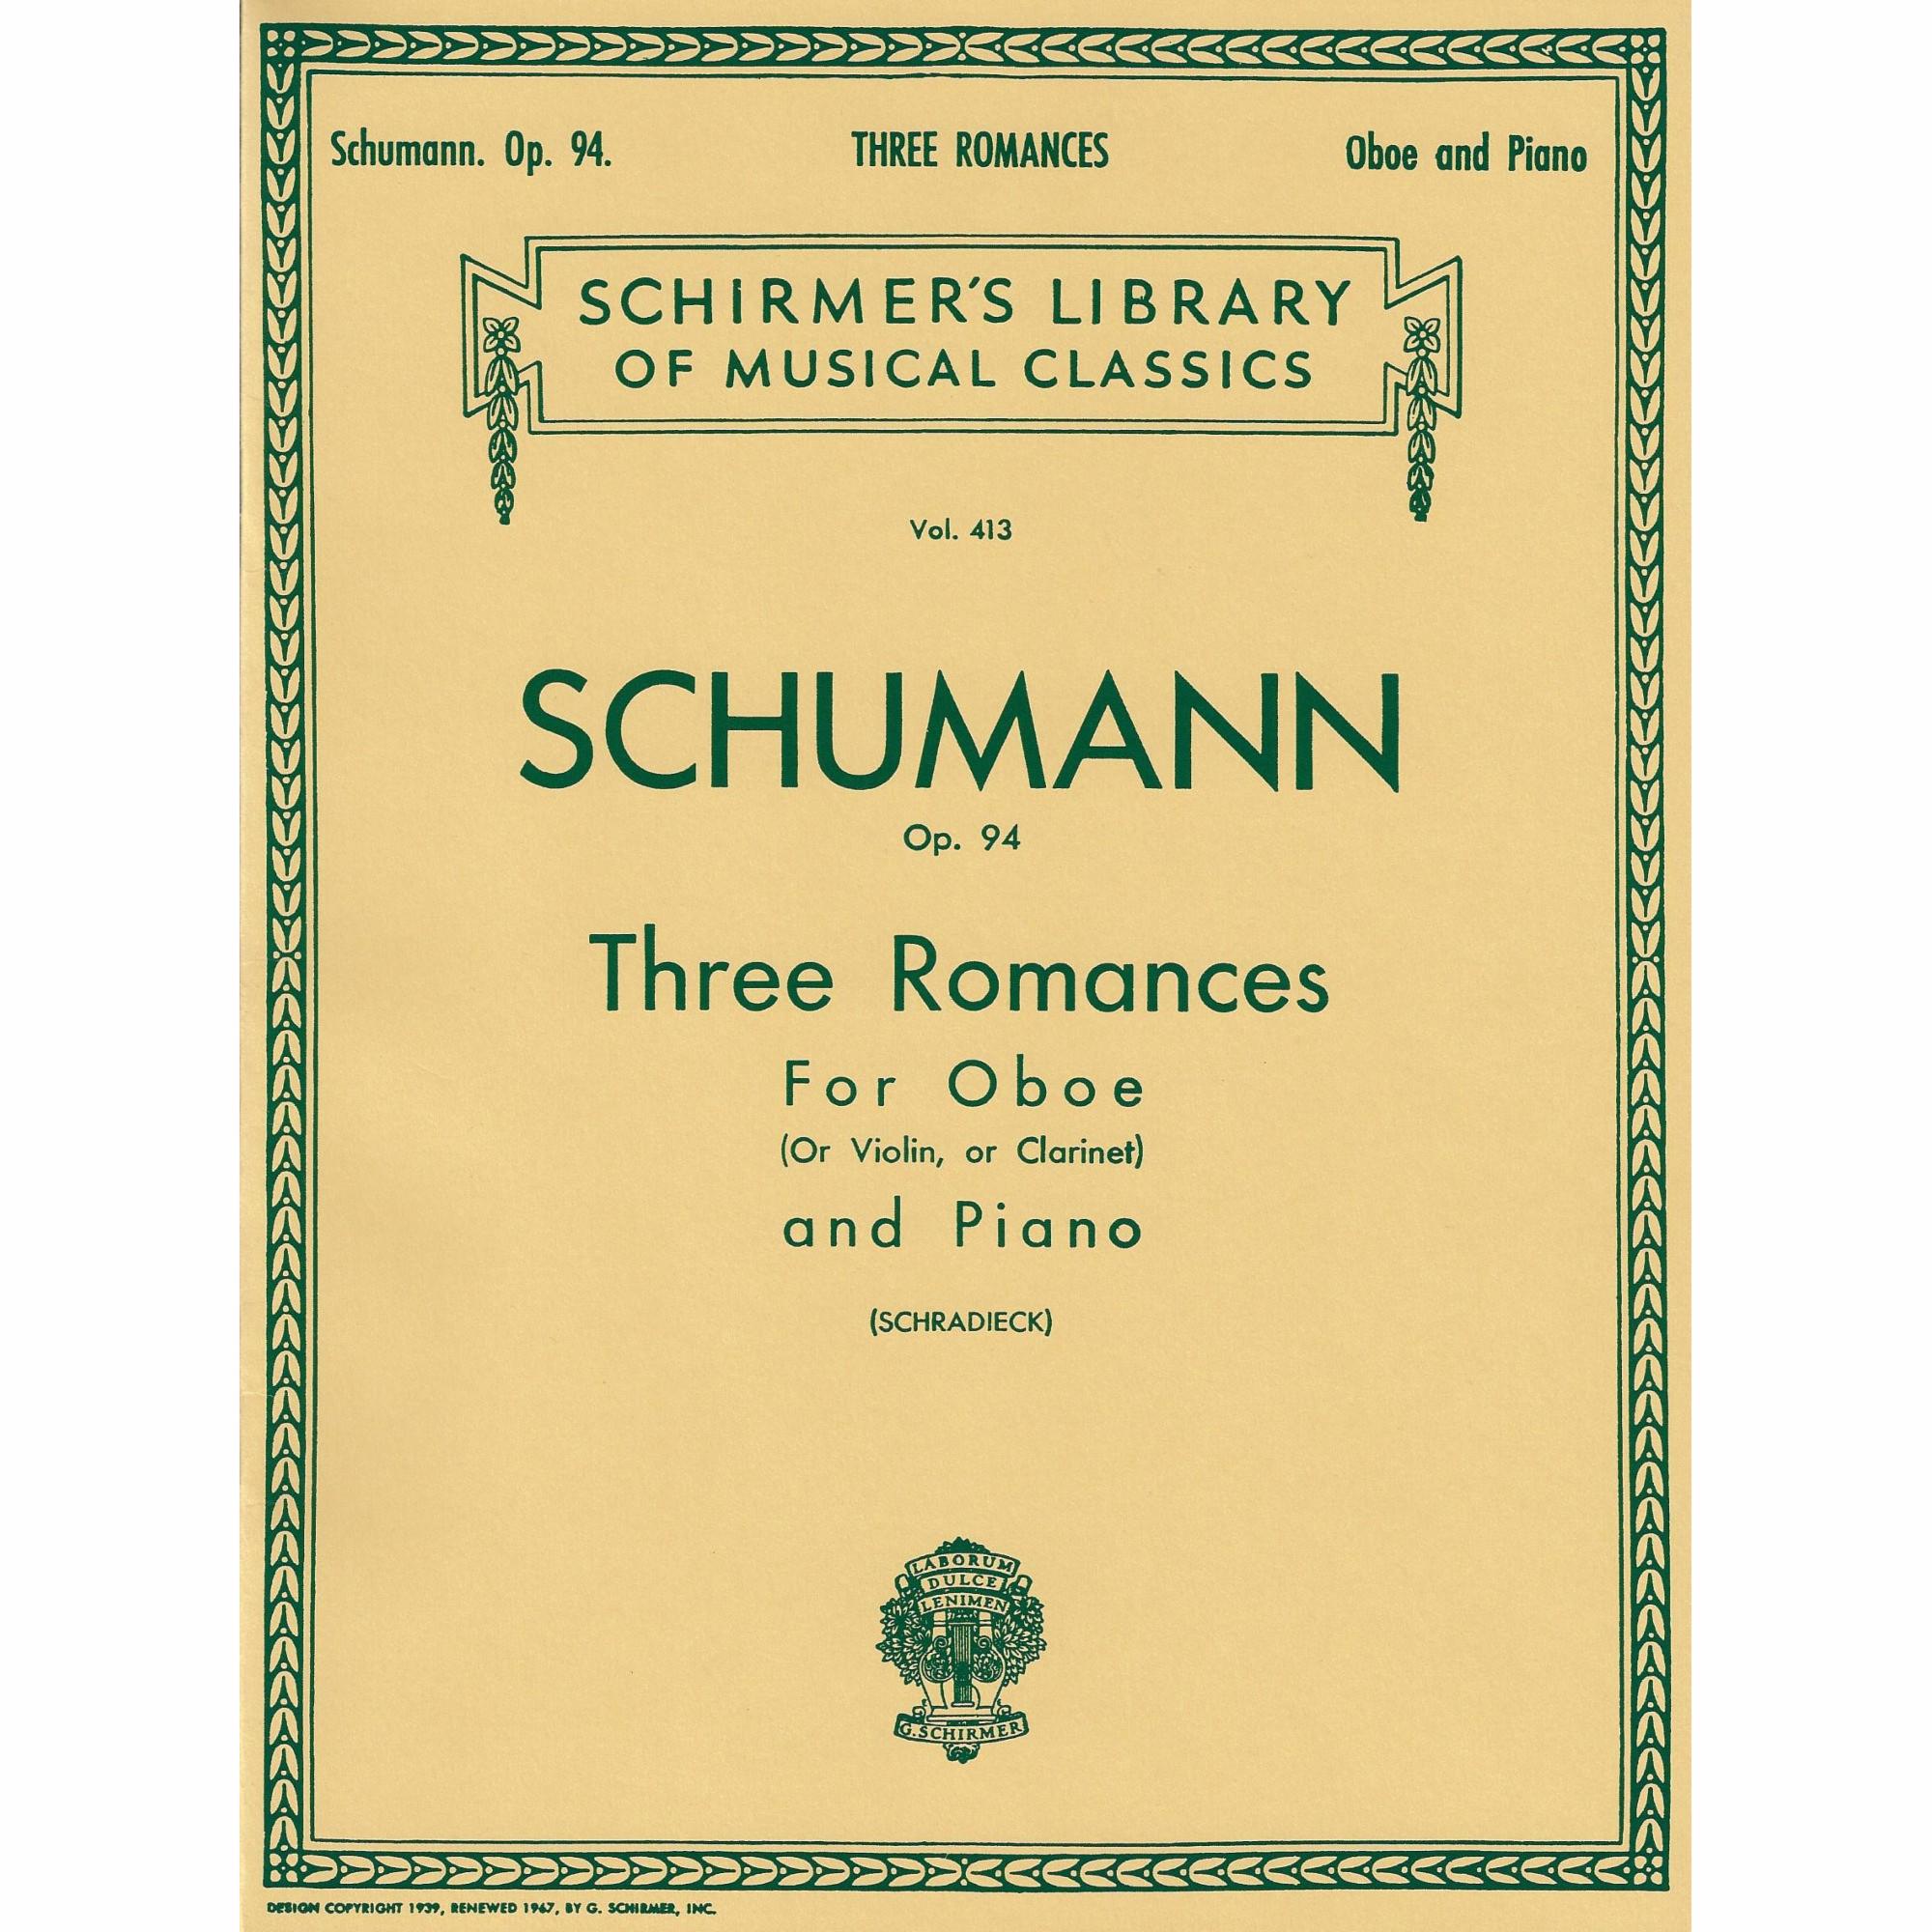 Three Romances, Op. 94 for Violin and Piano